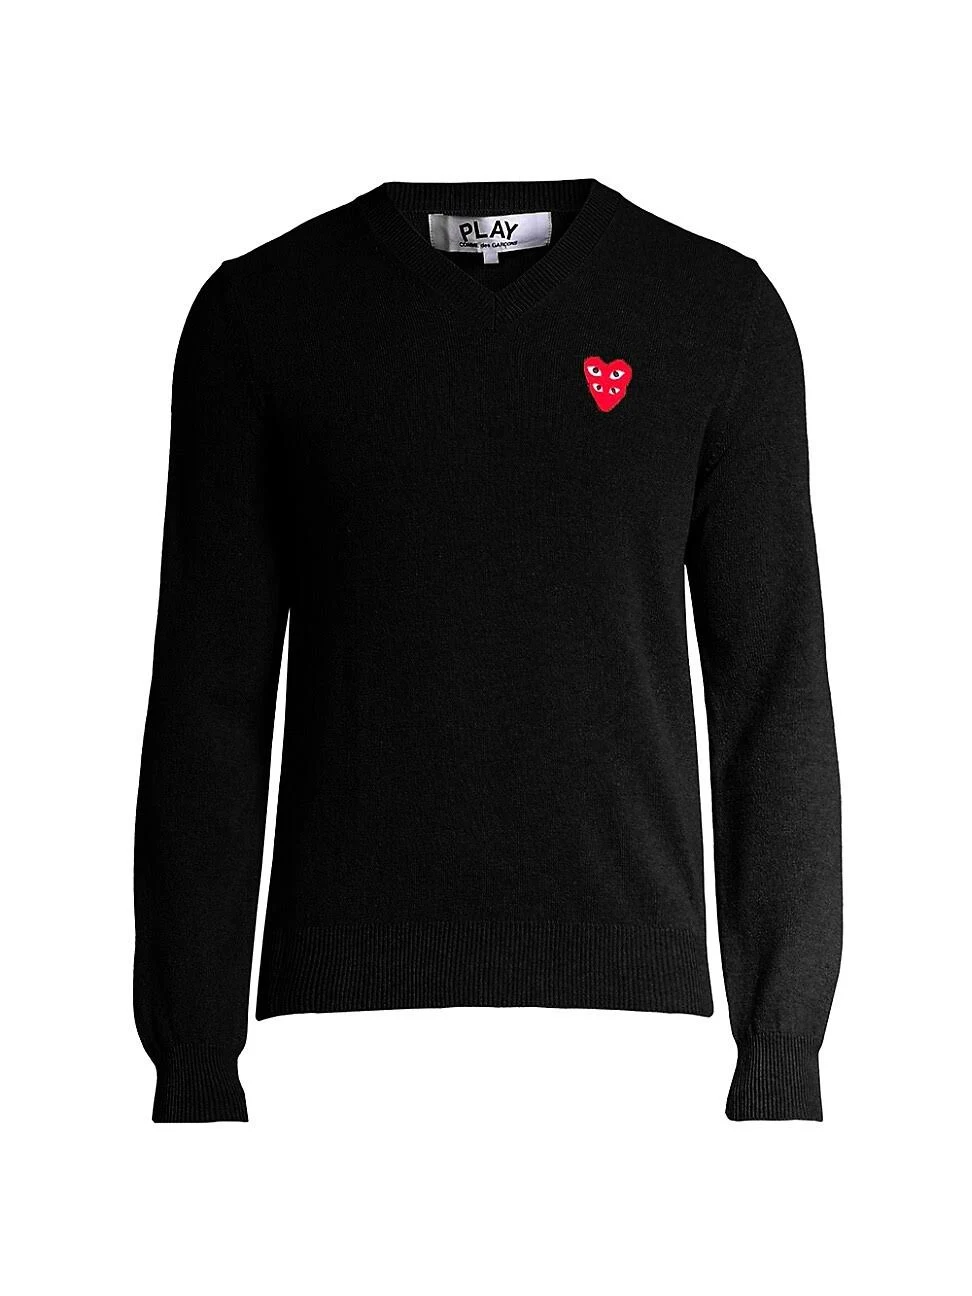 CDG PLAY Double Heart Knit V-Neck Sweater – TROPHY ROOM STORE